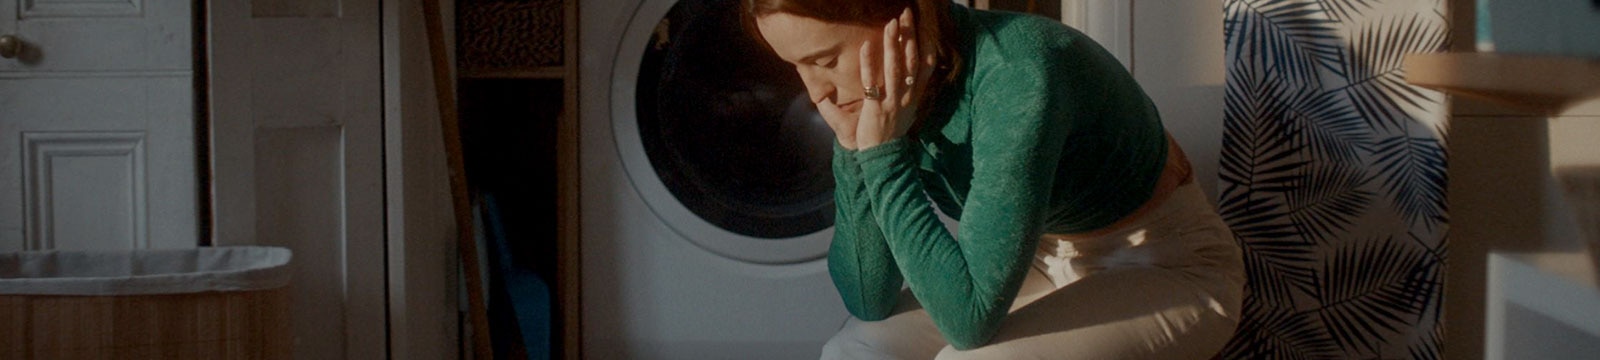 An exhausted woman sits alone in a laundry room